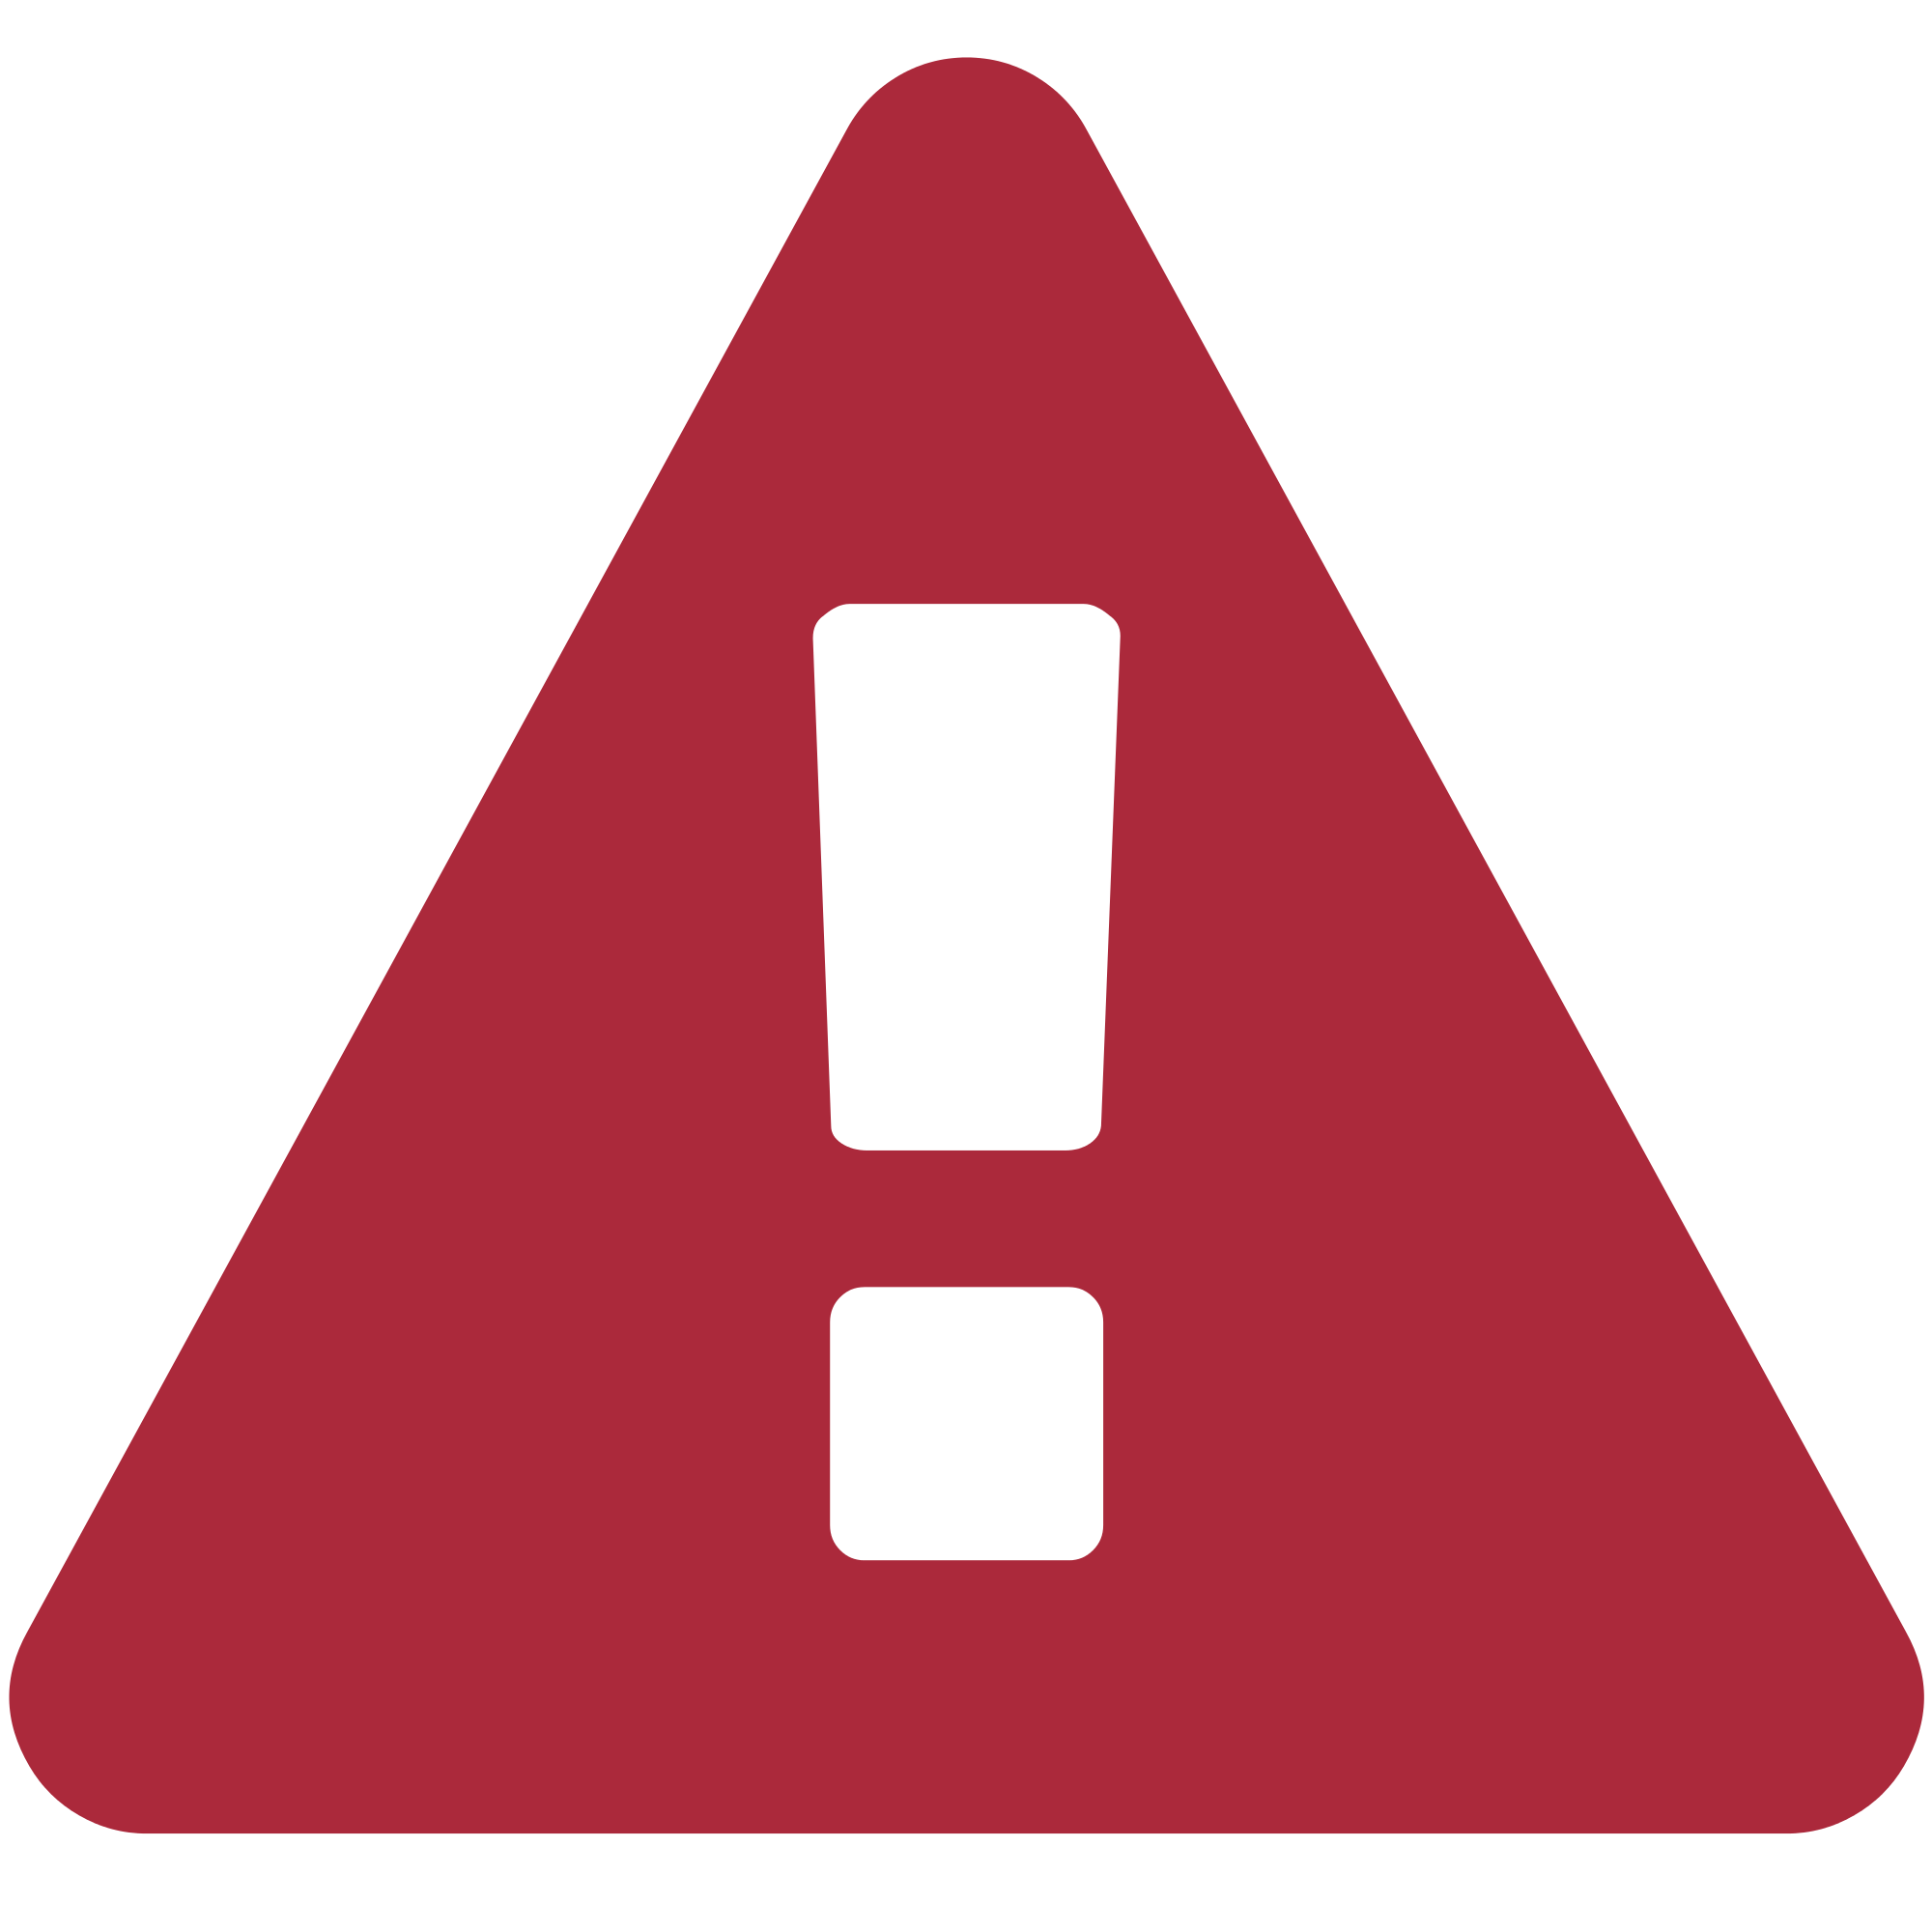 Red Warning Signs File:warning sign font awesome red.svg wikimedia ...